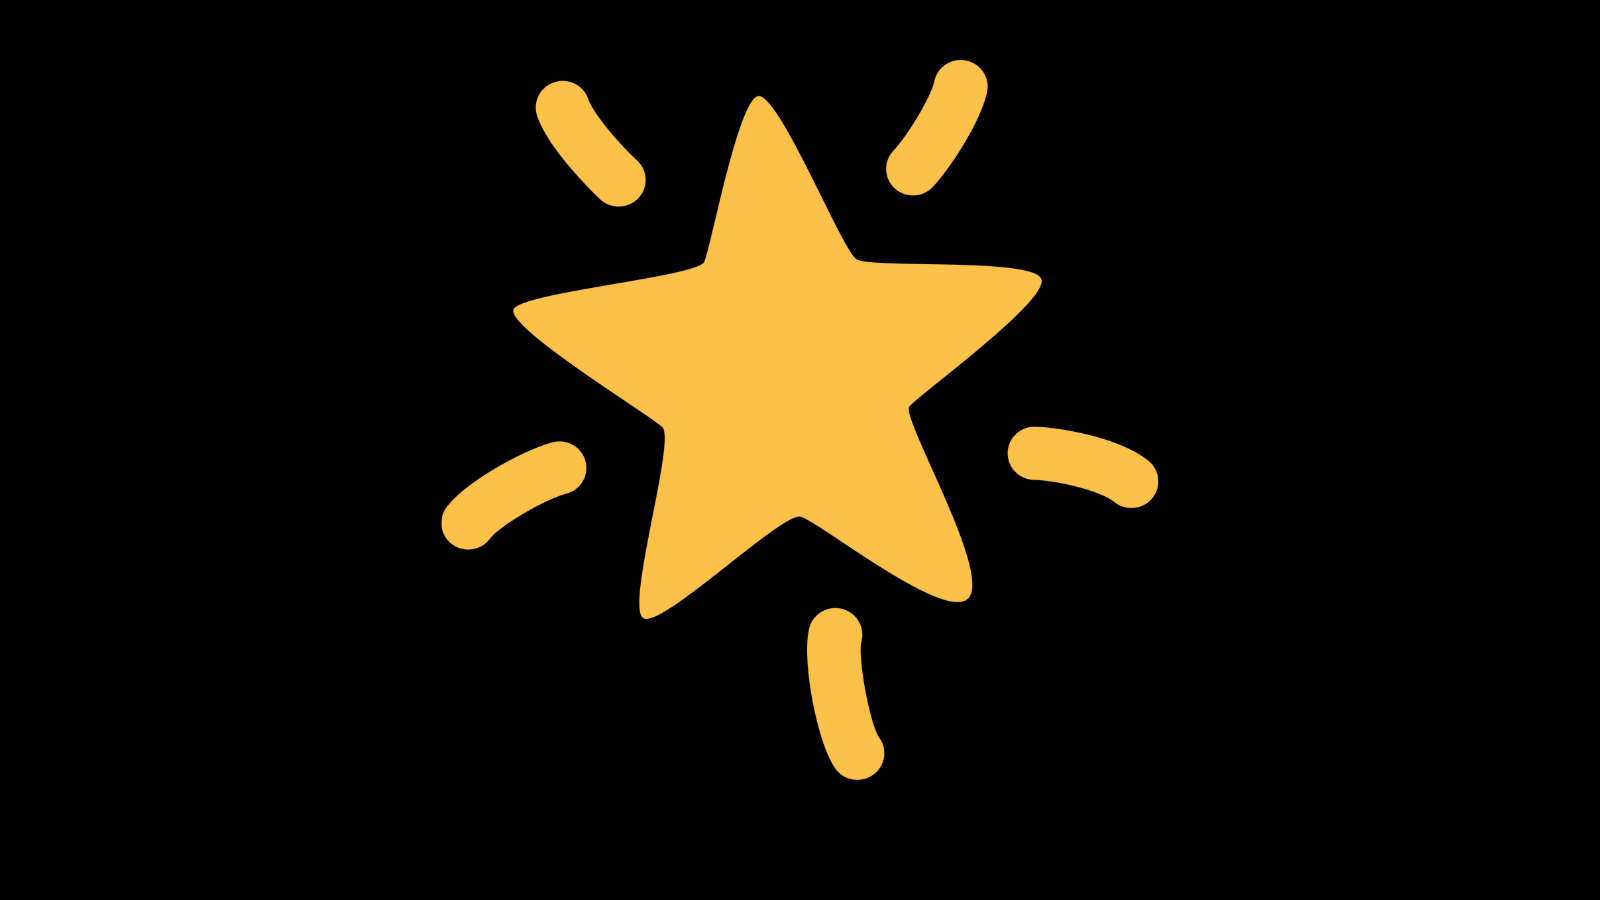 A hand-drawn star with lines for emphasis